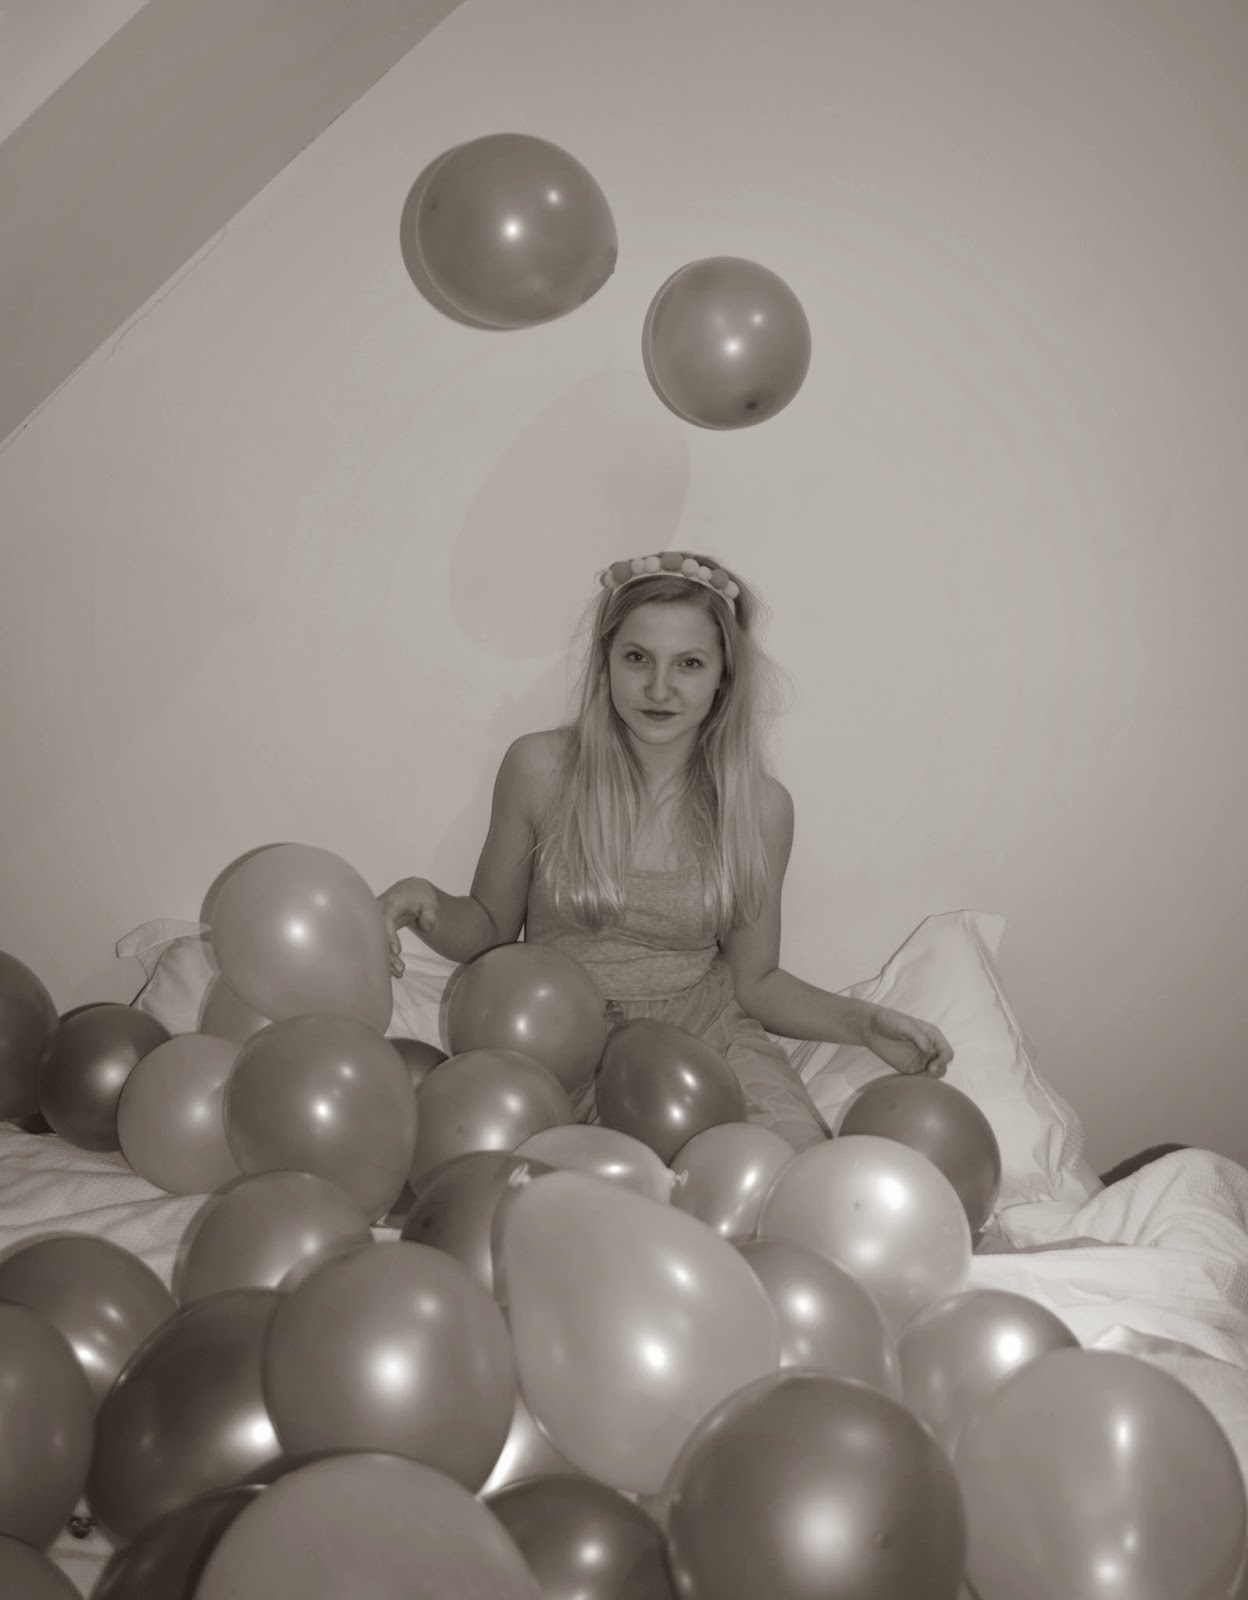 Avril Lavigne With Balloons 89